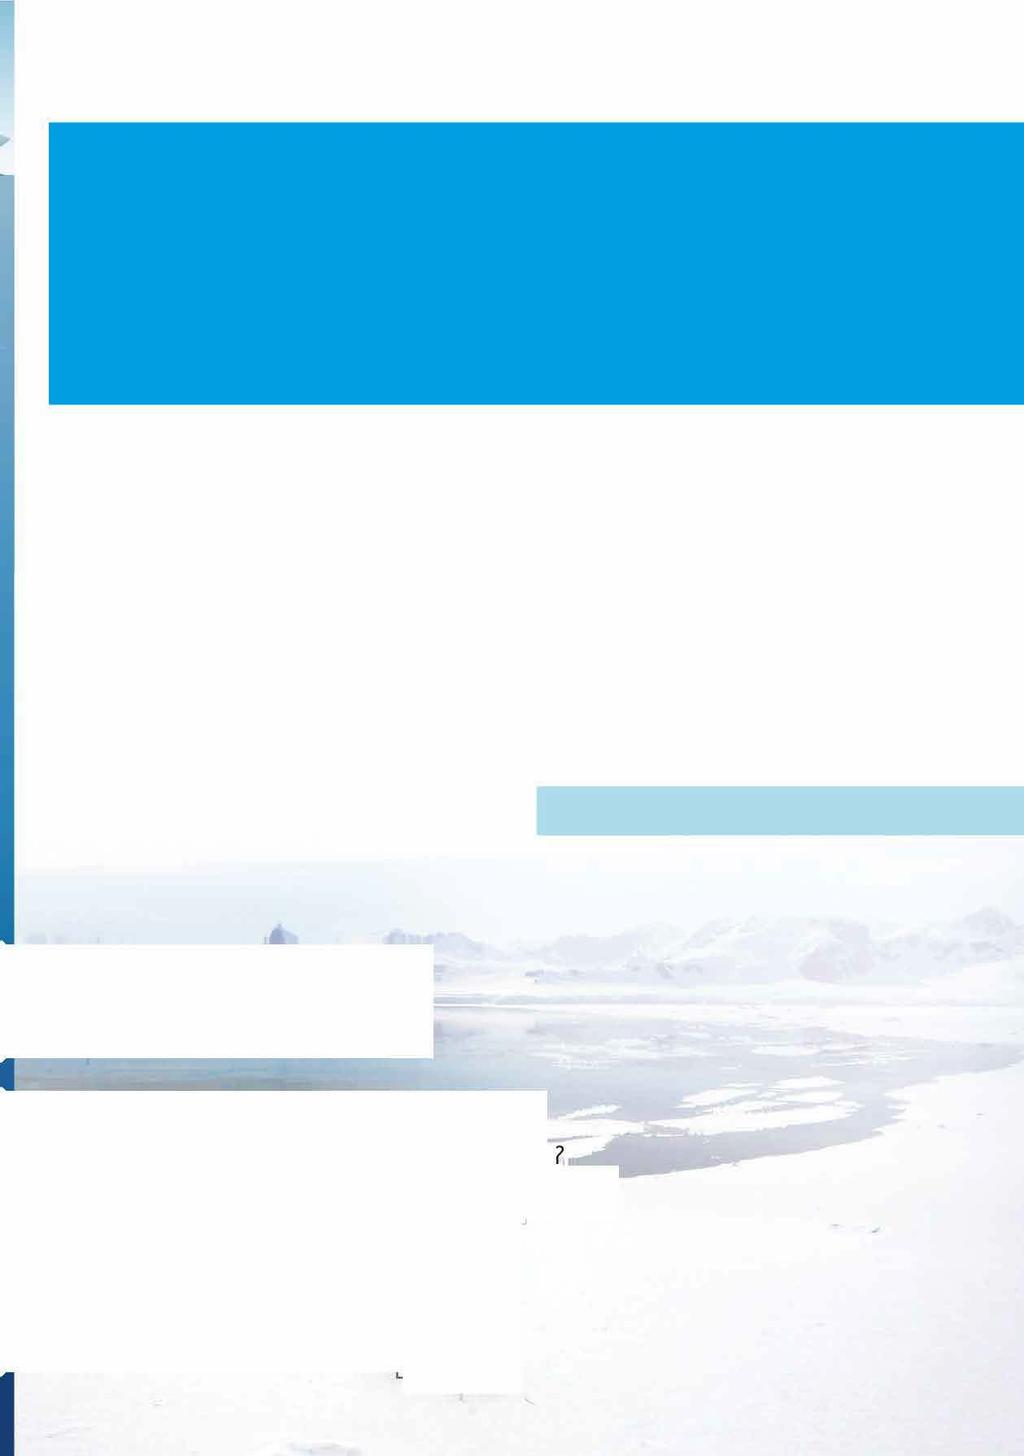 The IMO has adopted a mandatory Polar Code to provide for safe ship operation and environmental protection in the Polar Regions.